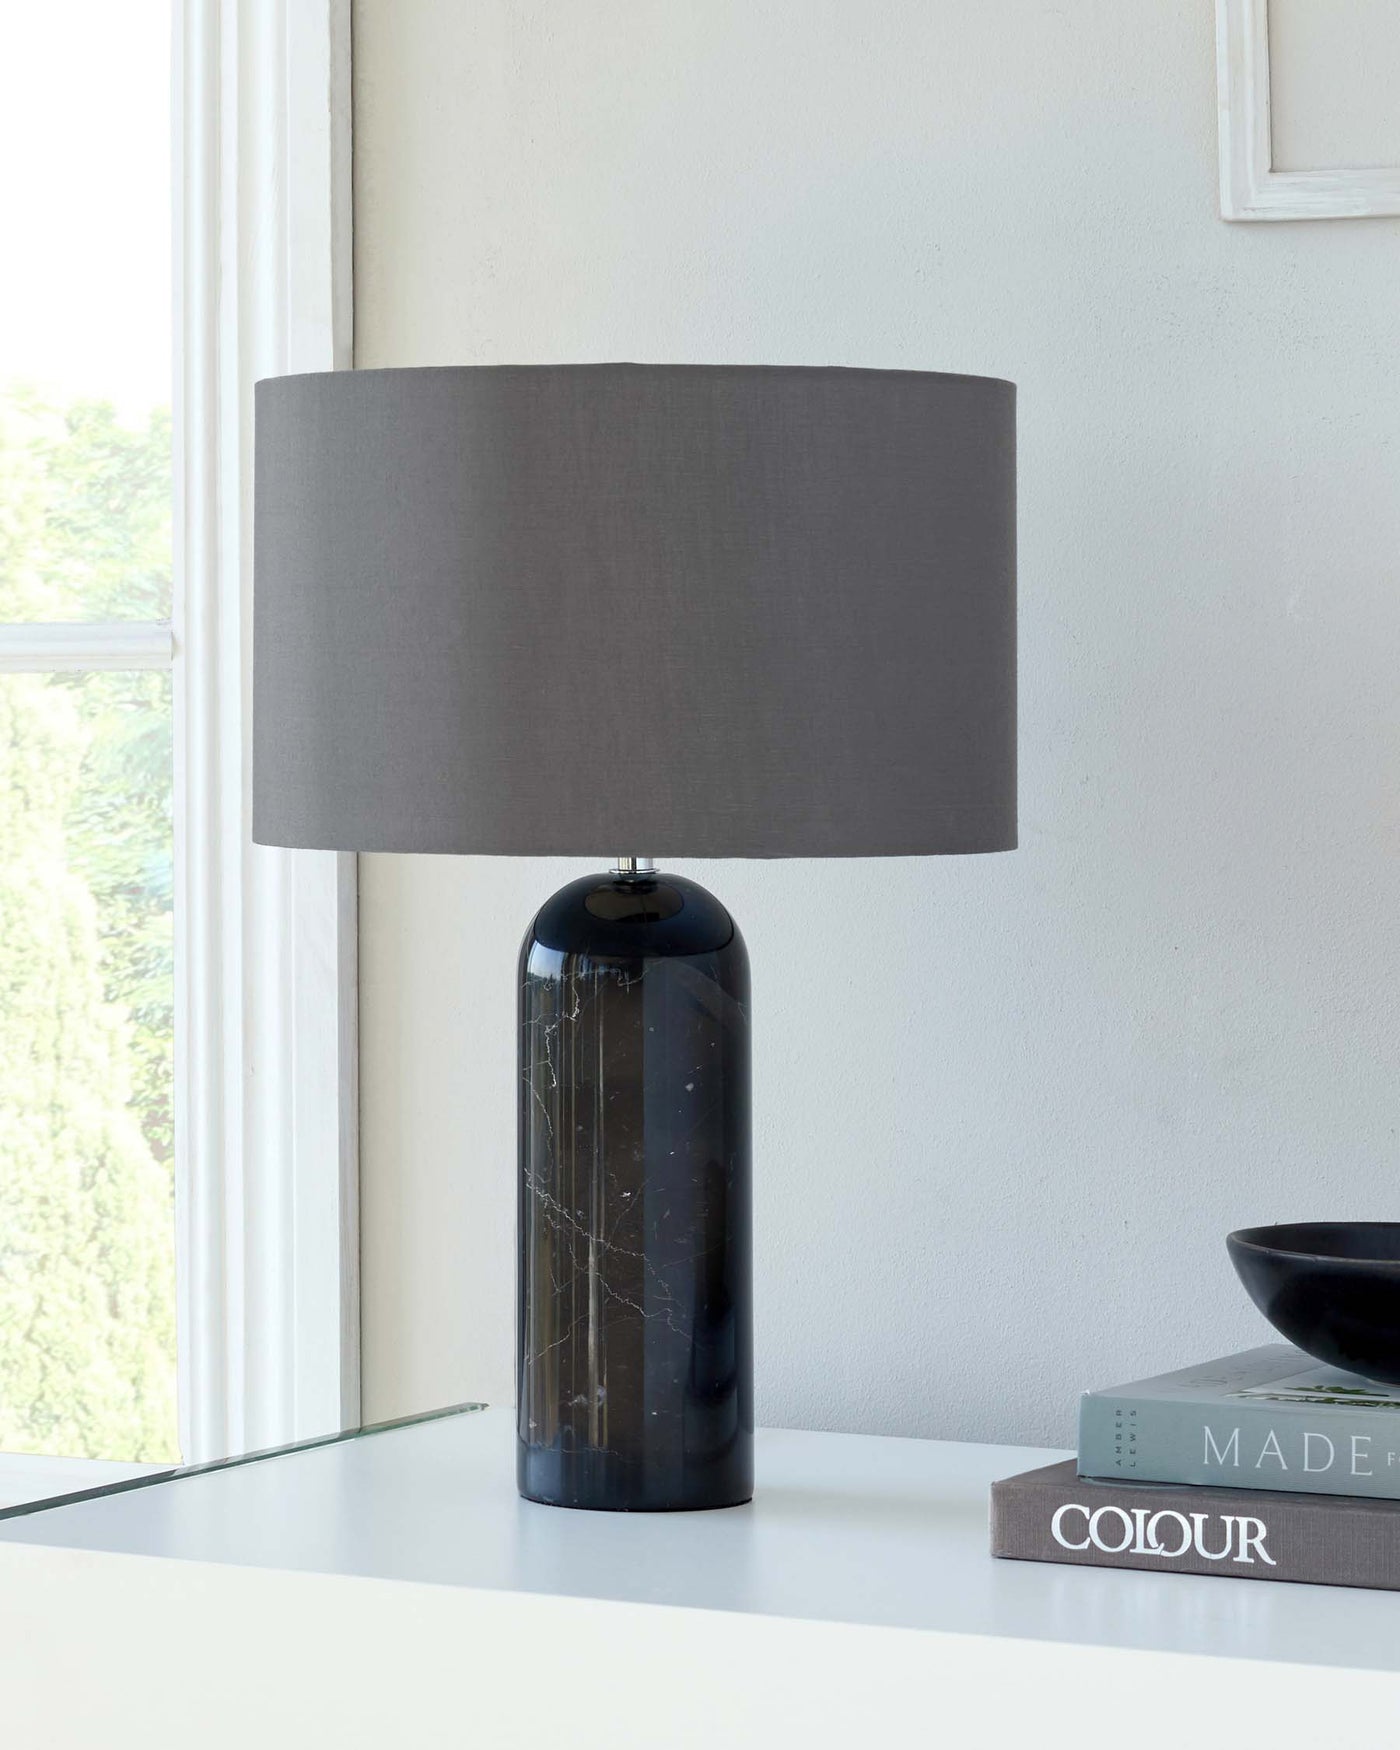 Modern table lamp with a cylindrical, navy blue marble base and a broad, grey fabric drum shade, displayed on a sleek white table next to decorative books and a bowl, with a window providing natural light in the background.